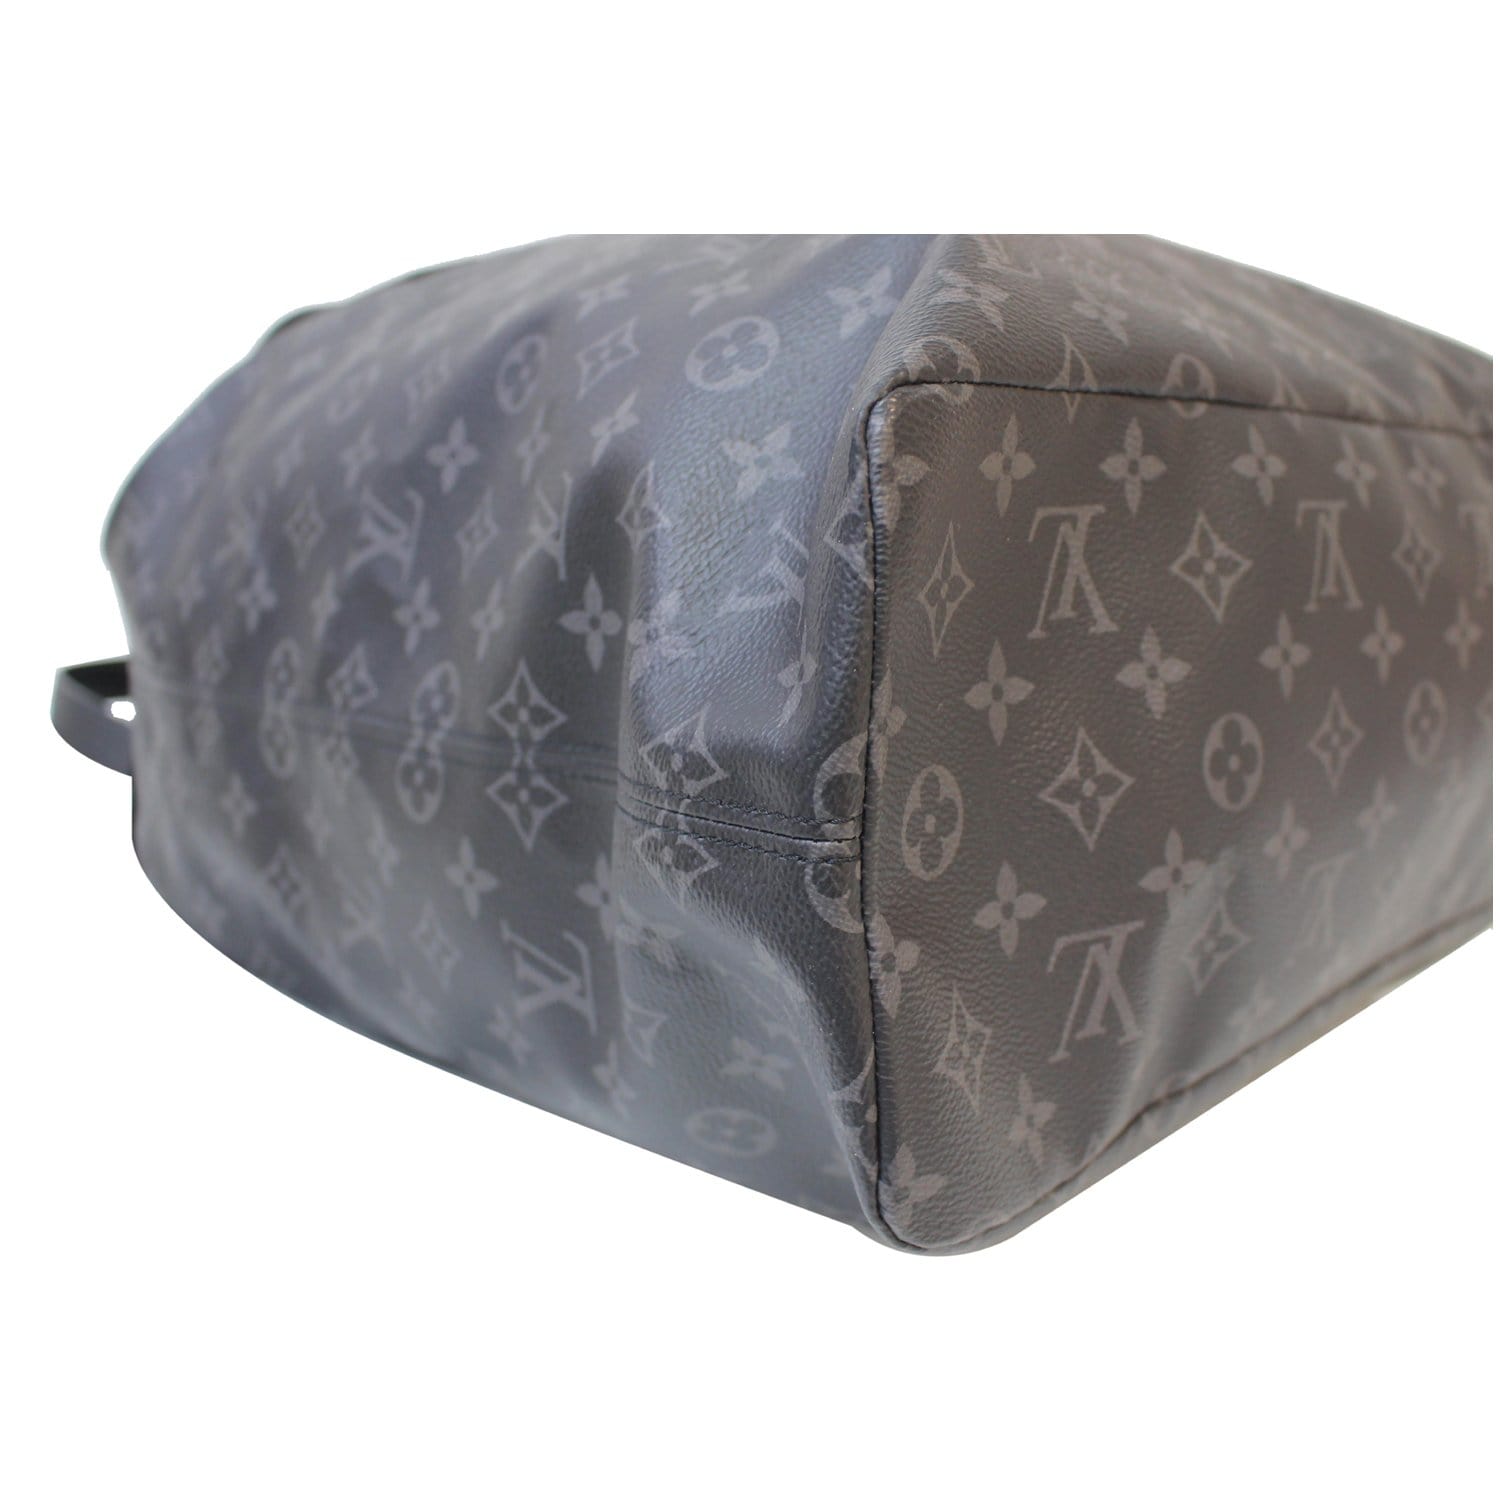 With Its Iconic Black Monogram Eclipse Canvas Sheathed Directly